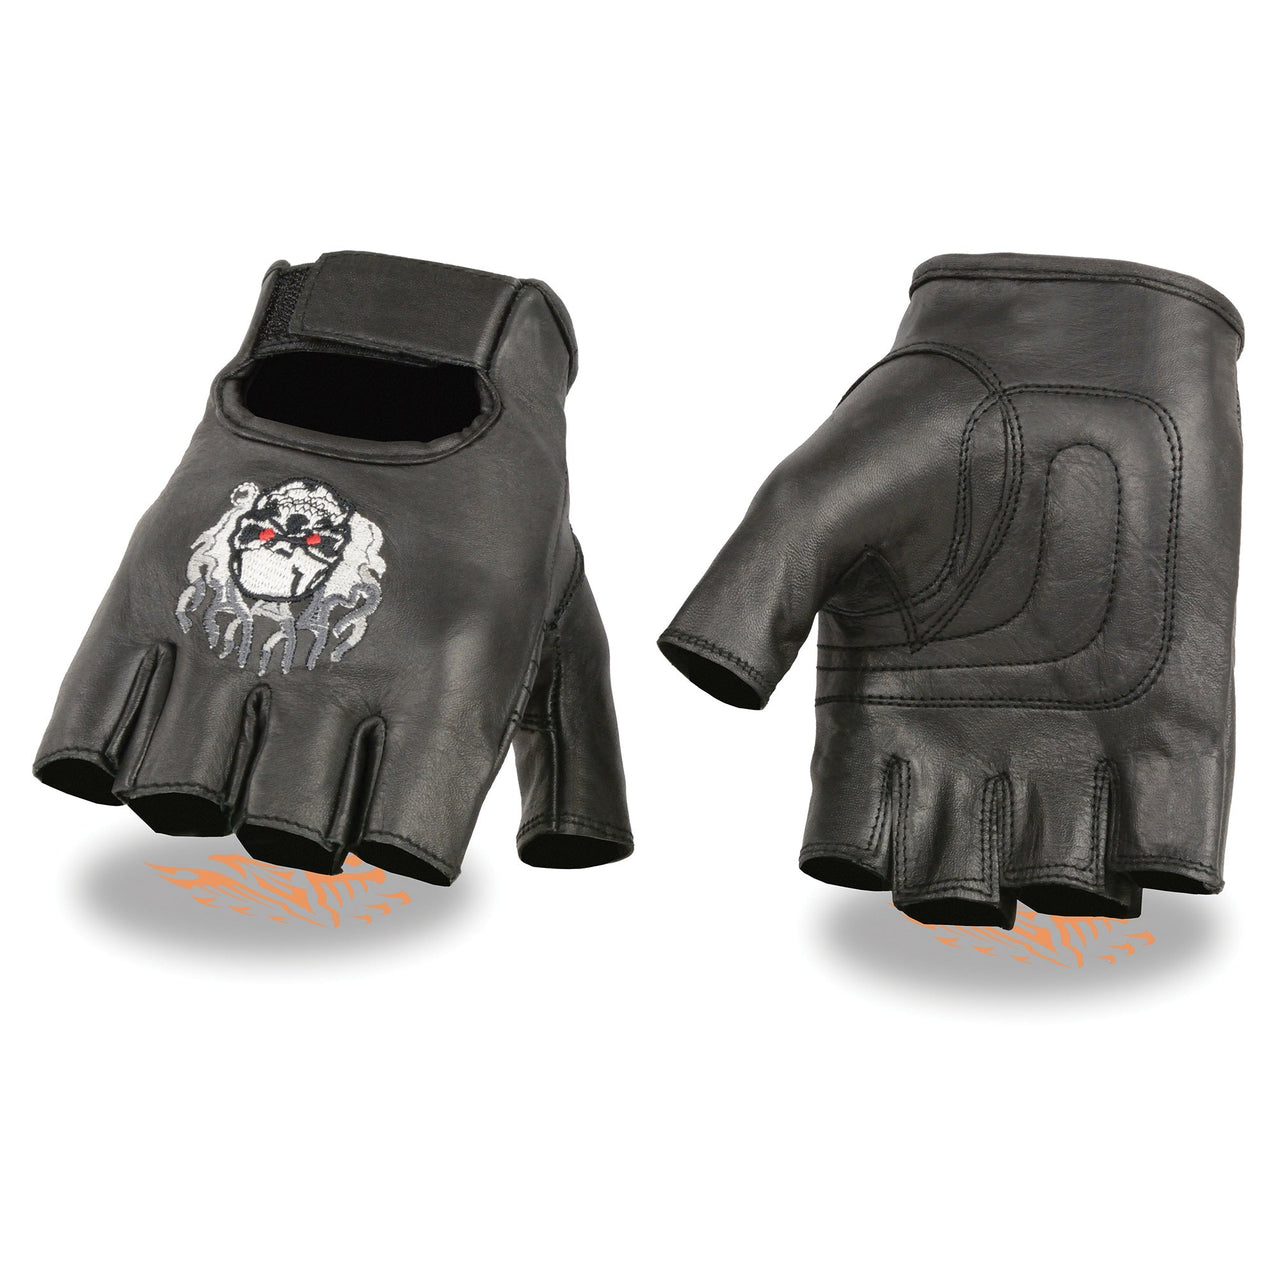 Men's Leather Fingerless Glove w/ Flaming Skull Embroidery - HighwayLeather